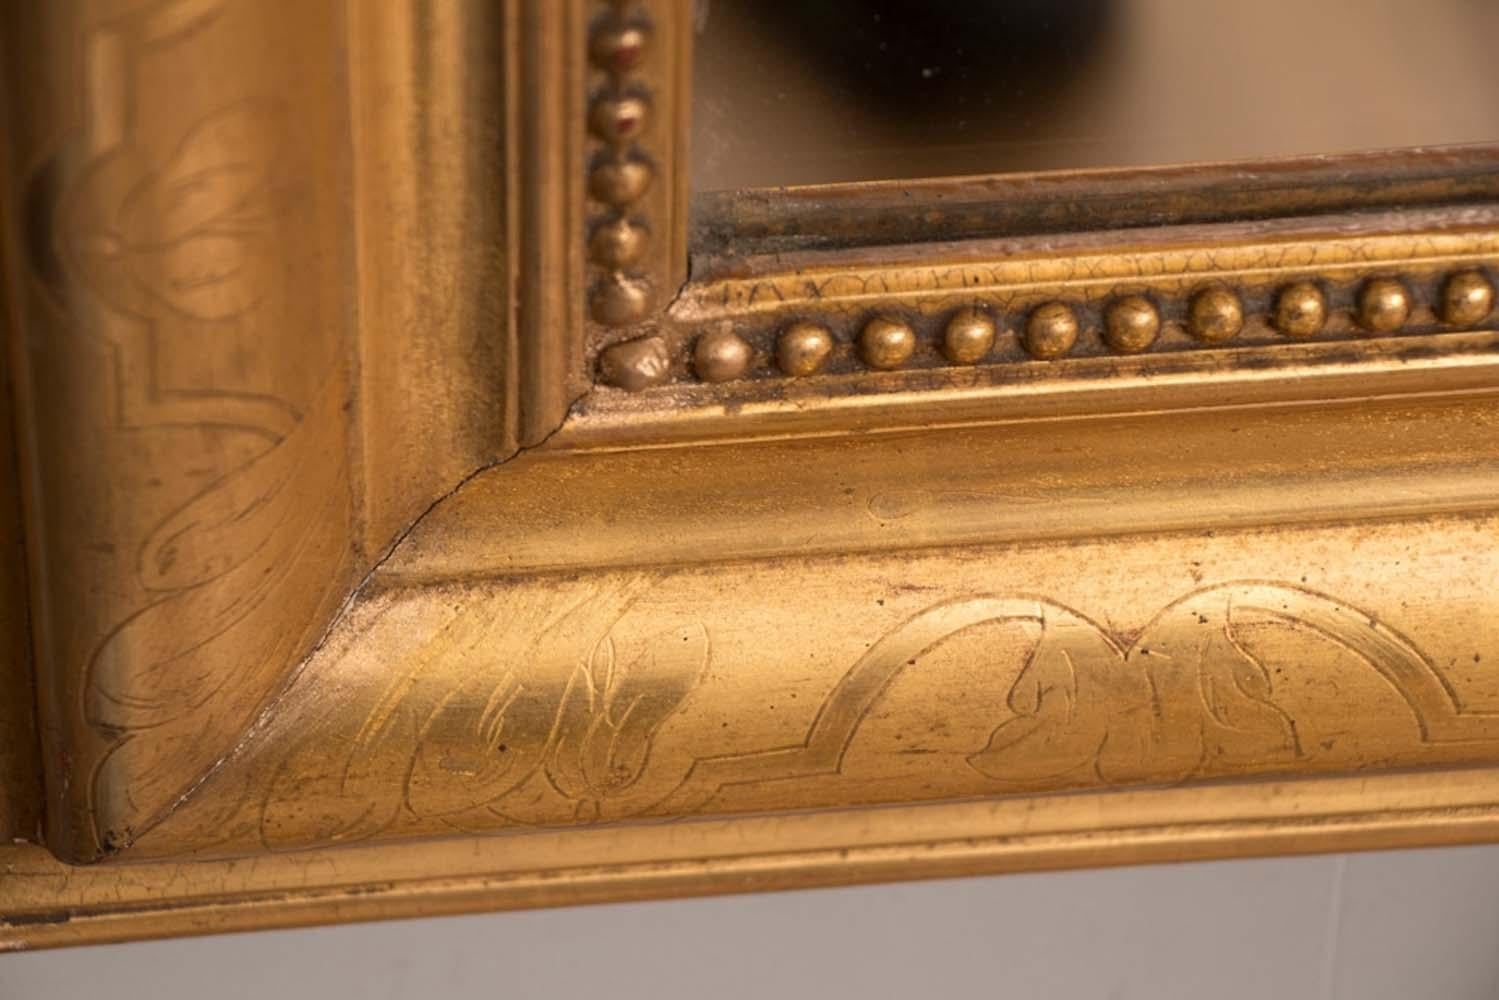 This is an absolutely superb original gilded French mirror bought from a home in Paris and is untouched and has a near immaculate original gilded condition.

There are a few surface scratches on the original mirror plate, however nothing which